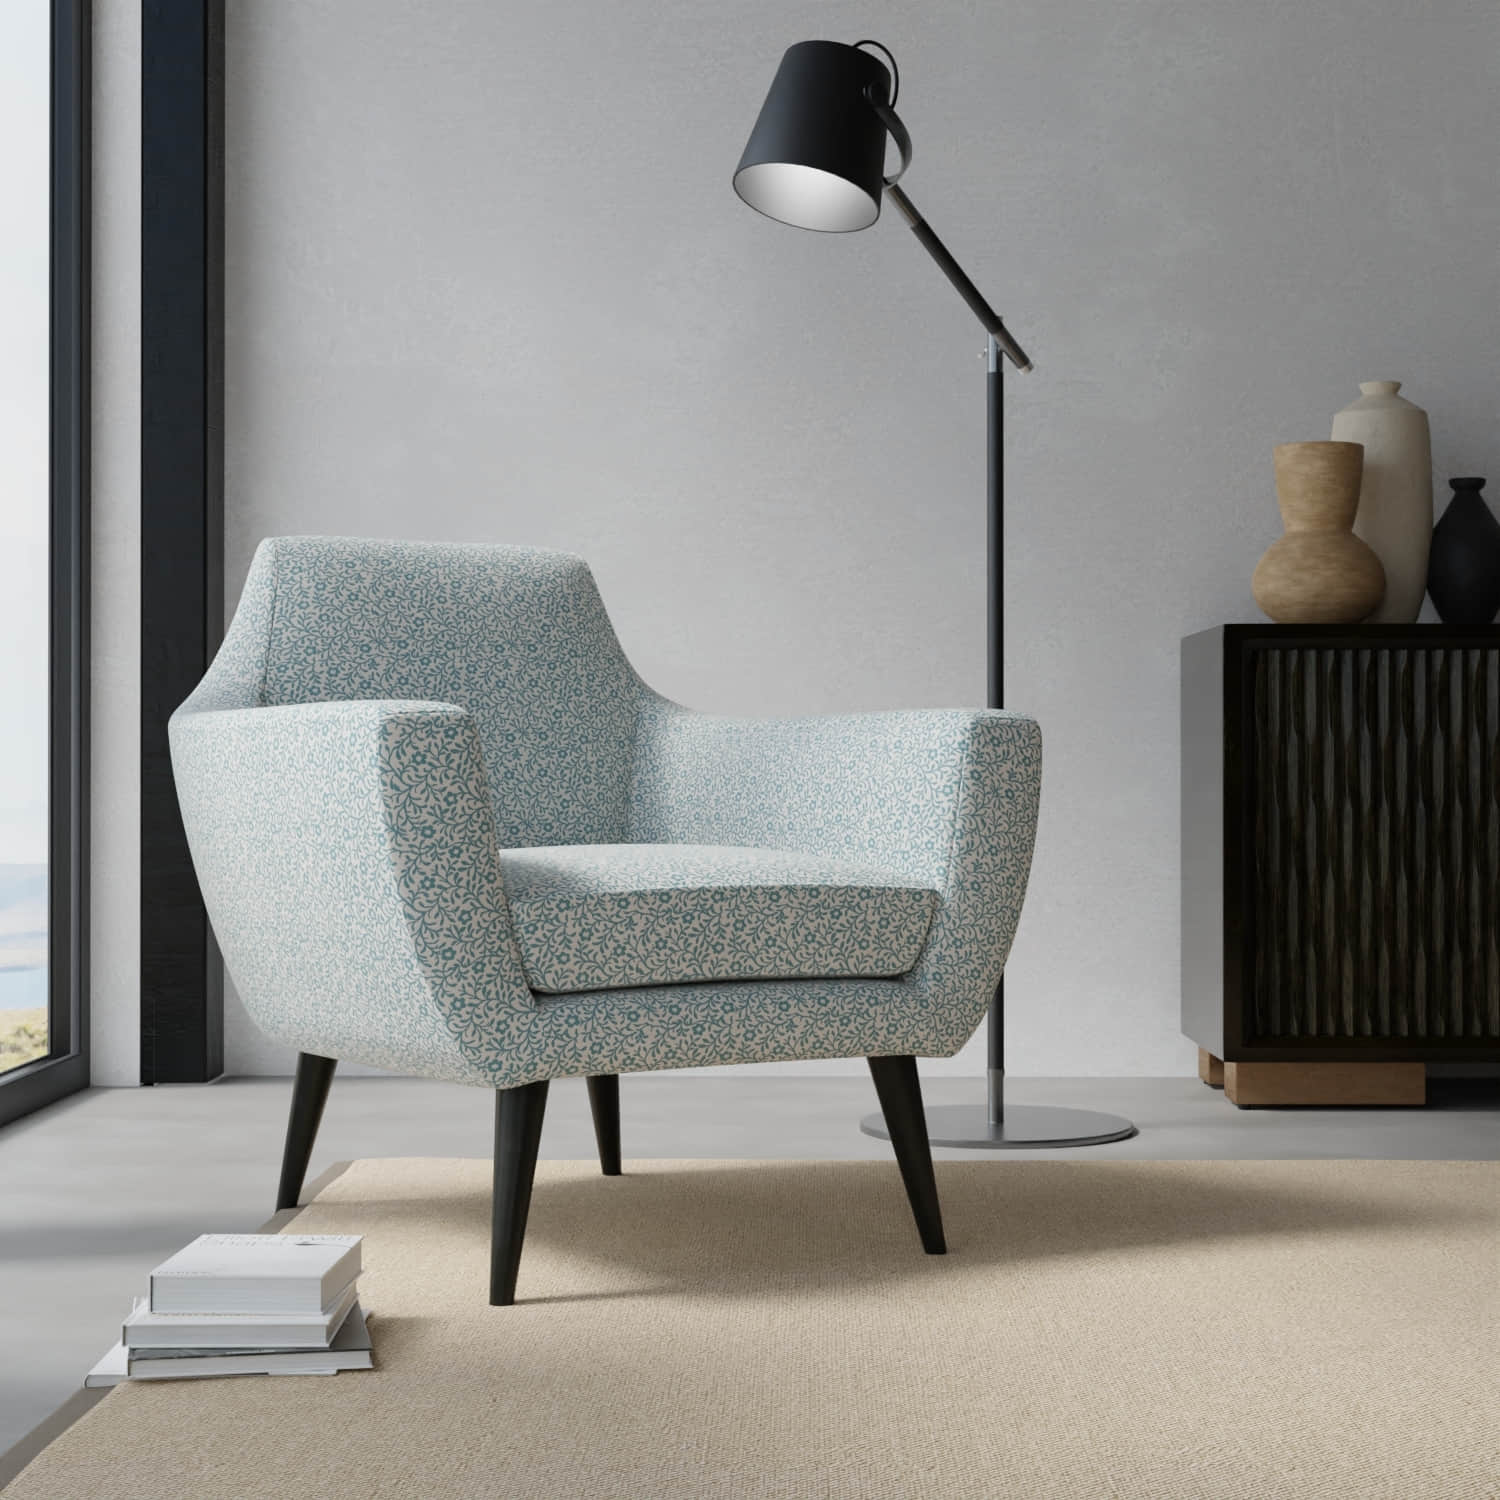 Bryant Indigo upholstered on a contemporary chair